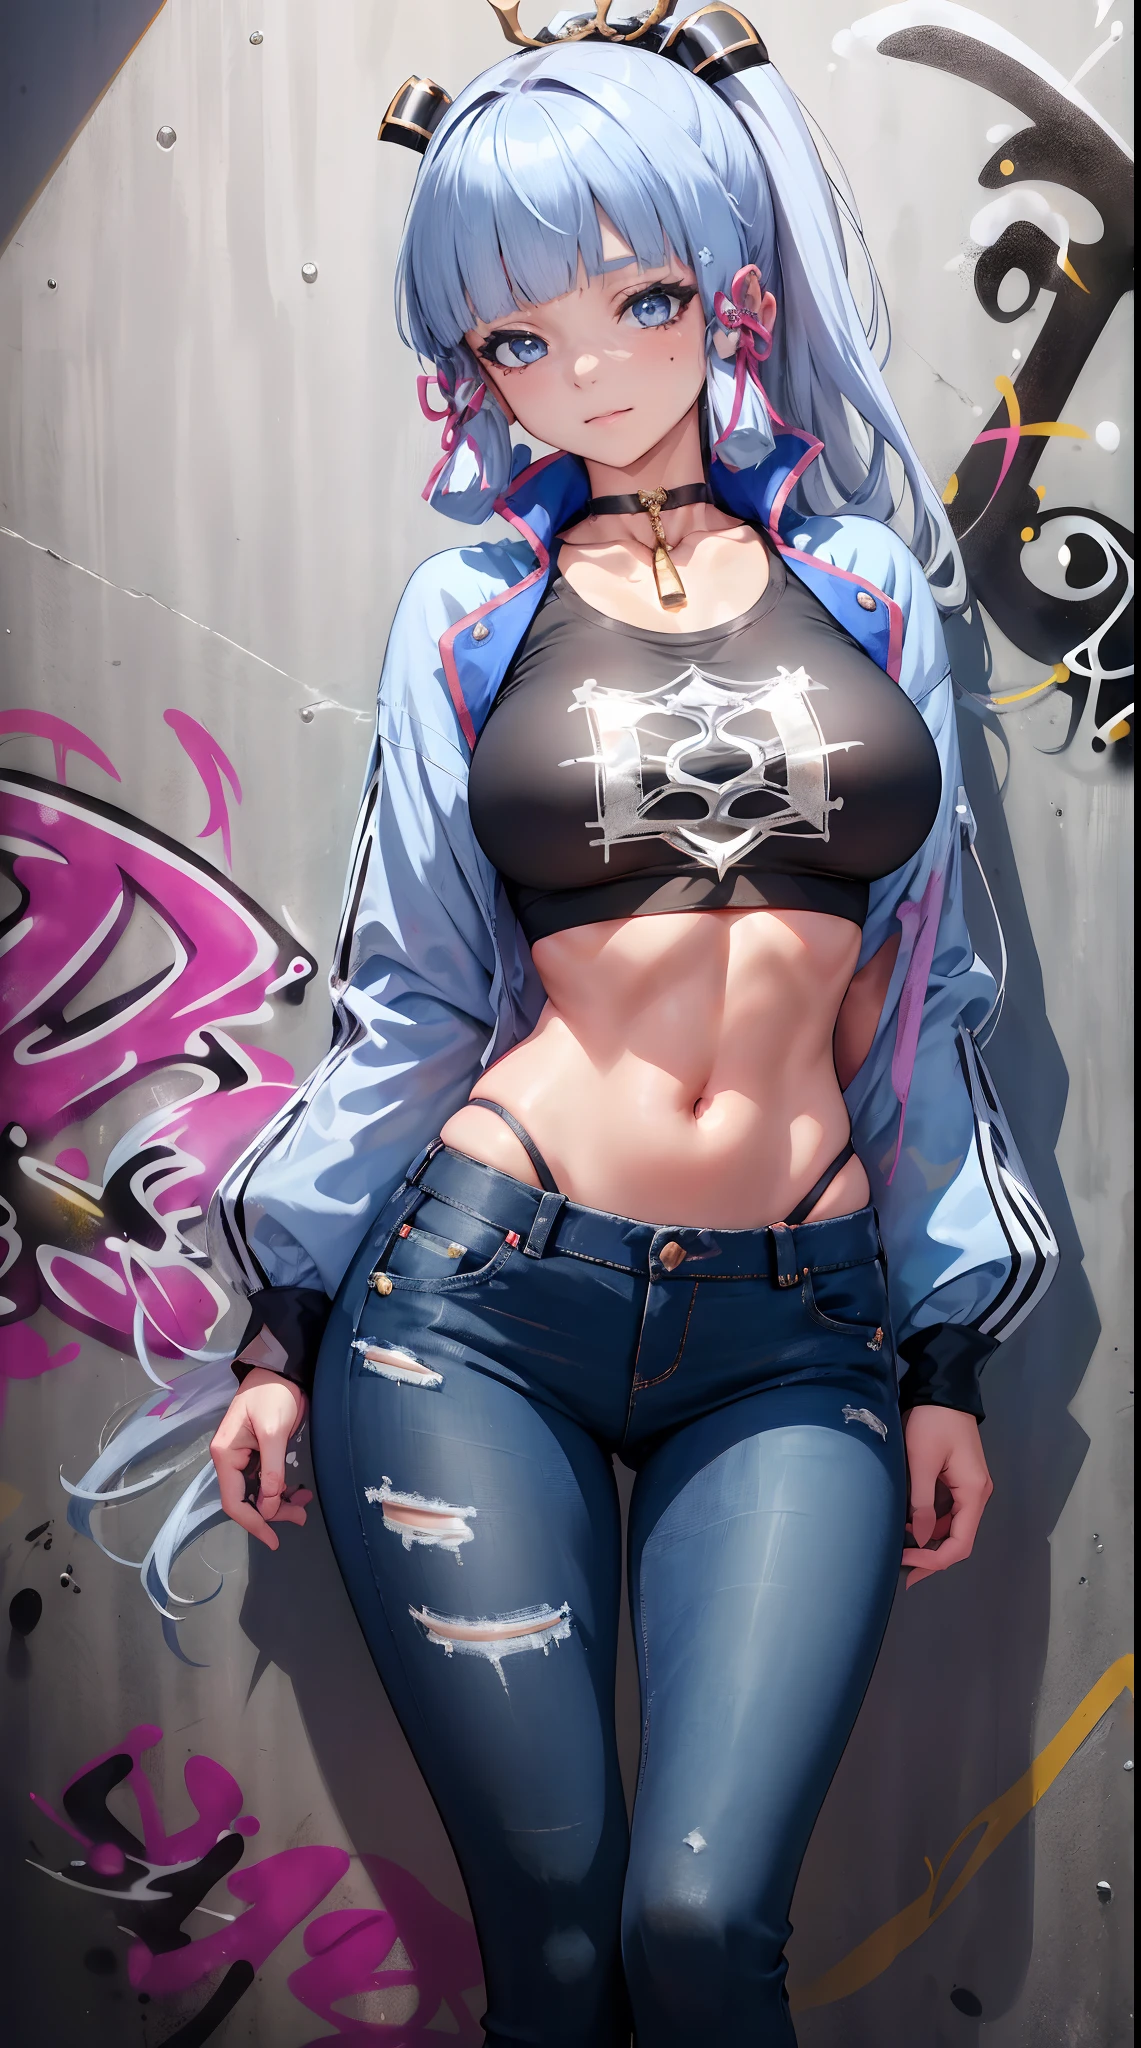 kamisato ayaka|genshin impact, master-piece, bestquality, 1girls,25 years old, crop top, Long Jeans, oversized breasts, ,bara, crop top, shorts jeans, choker, (Graffiti:1.5), Splash with purple lightning pattern., arm behind back, against wall, View viewers from the front., Thigh strap, Head tilt, bored,